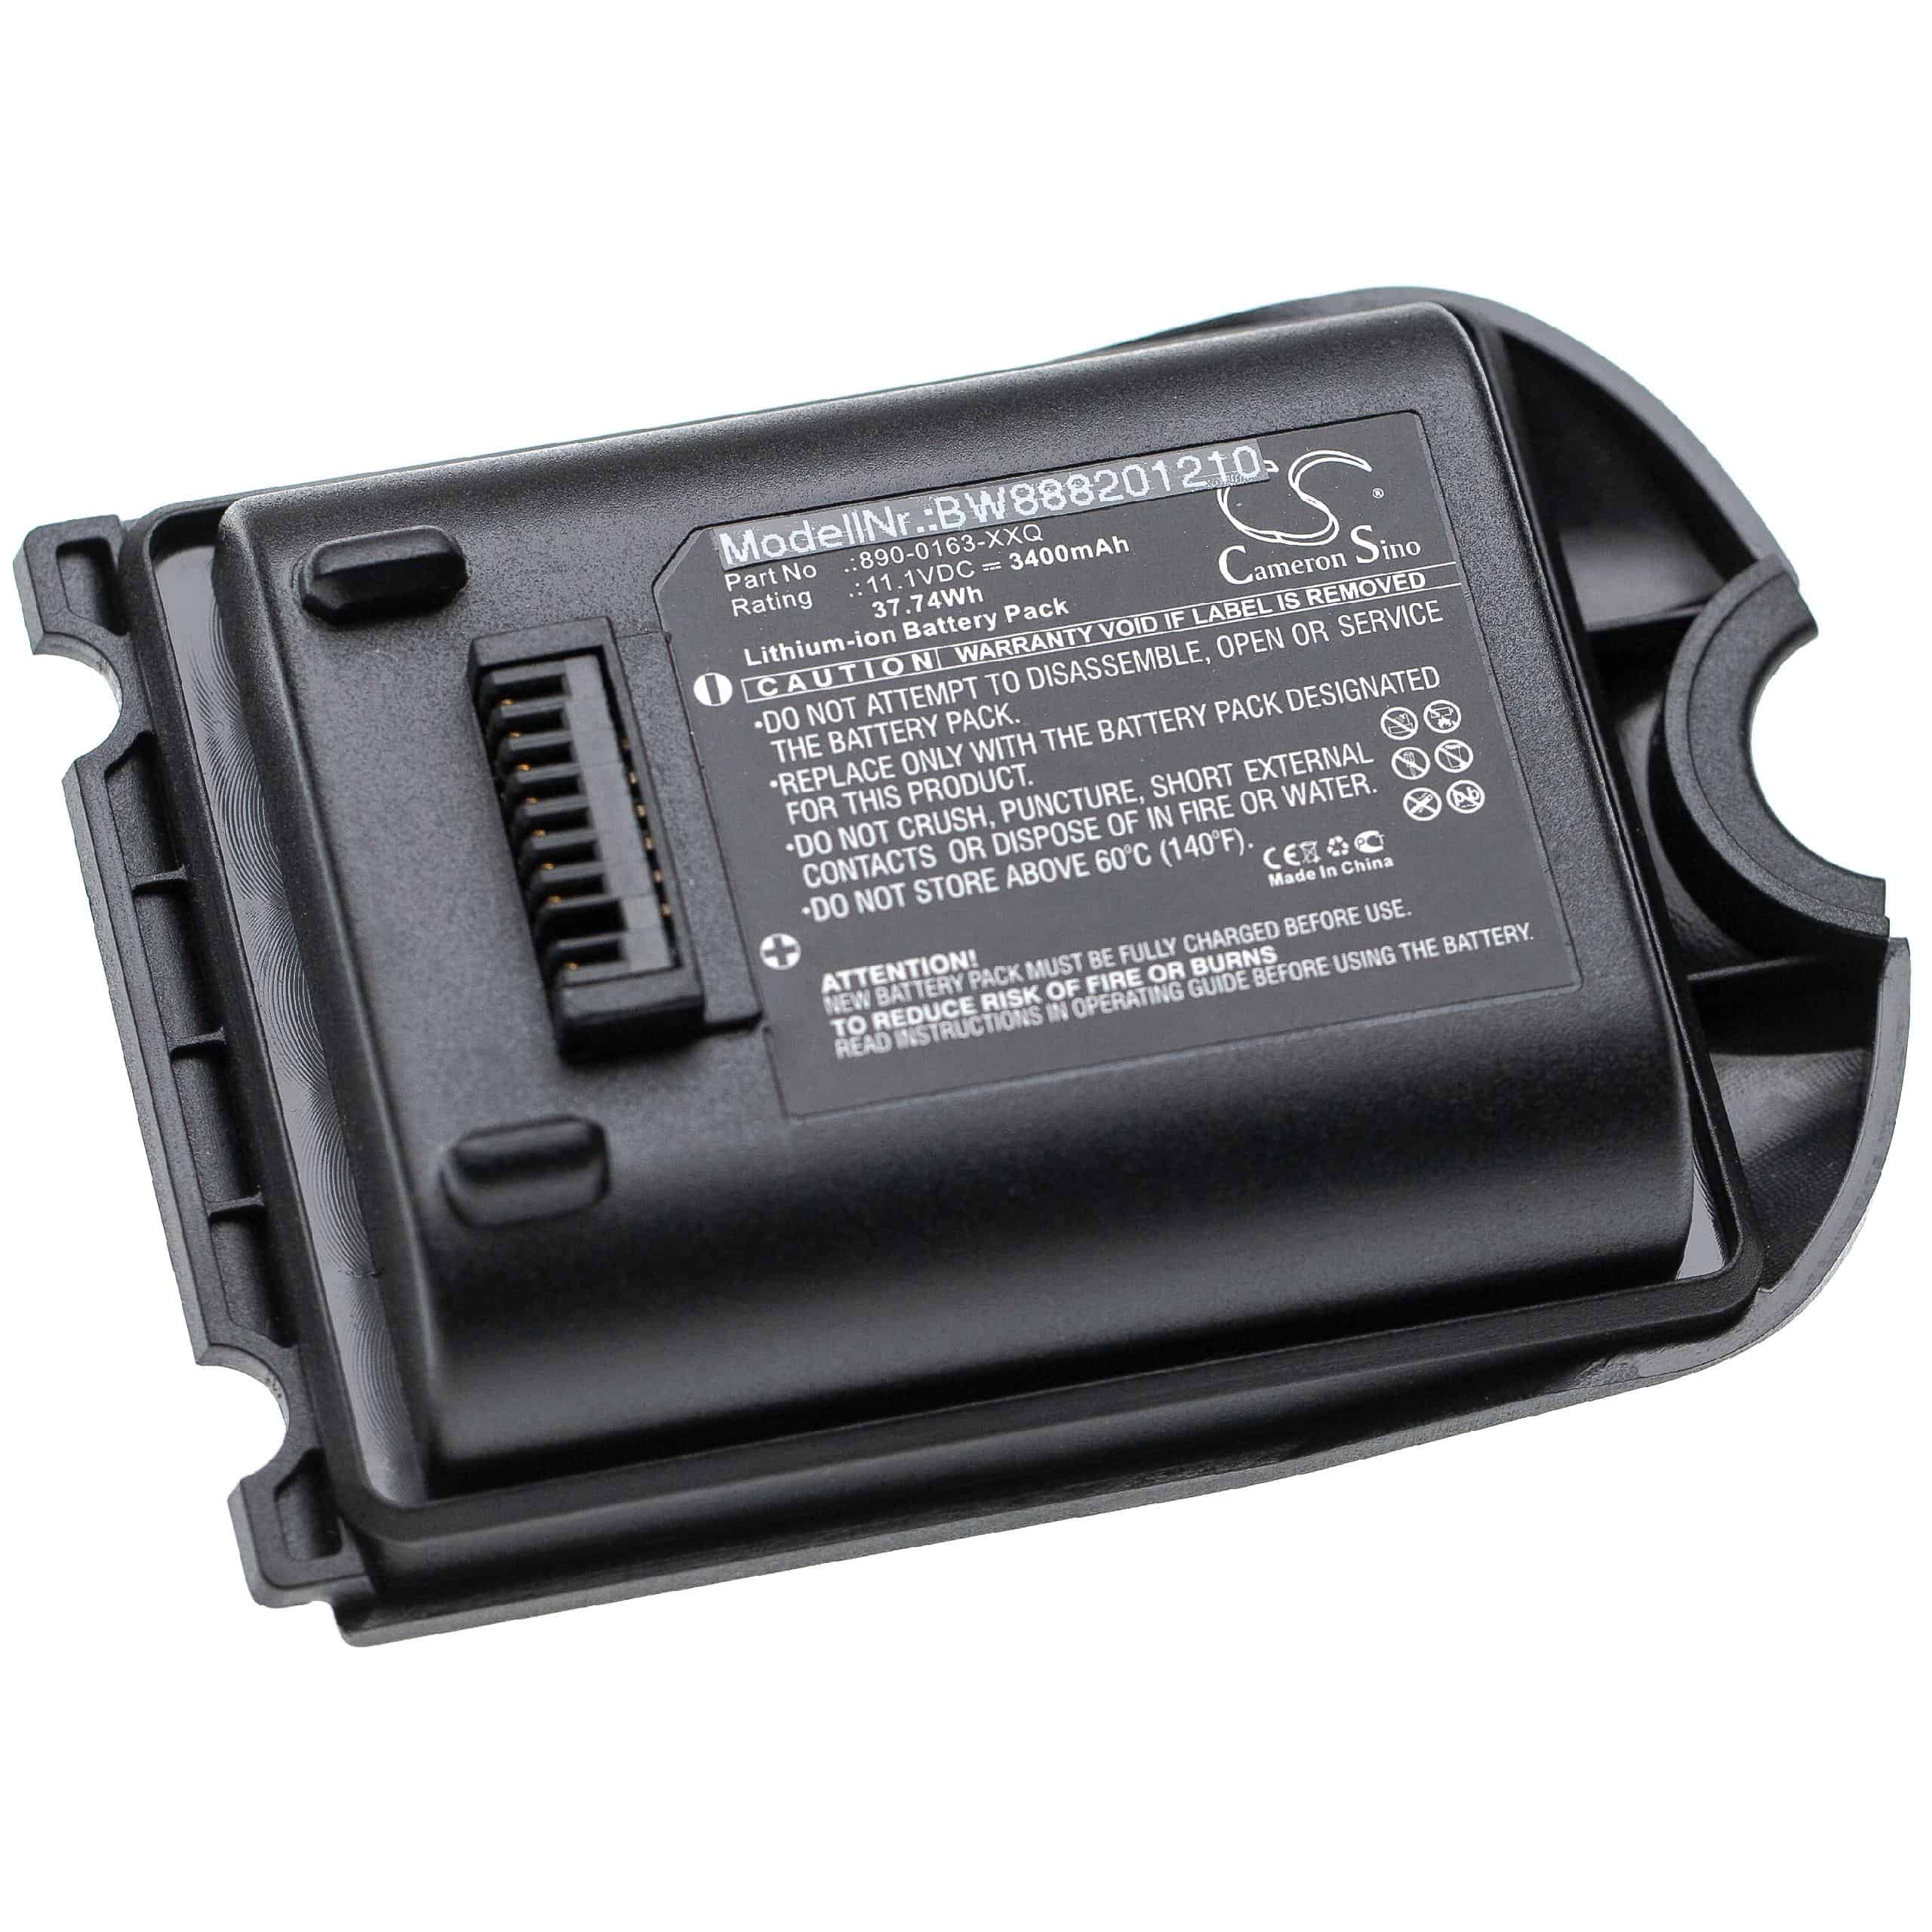 Laser Battery Replacement for Spectra Precision 890-0163, 990652-004756, 890-0163-XXQ - 3400mAh 11.1V Li-Ion